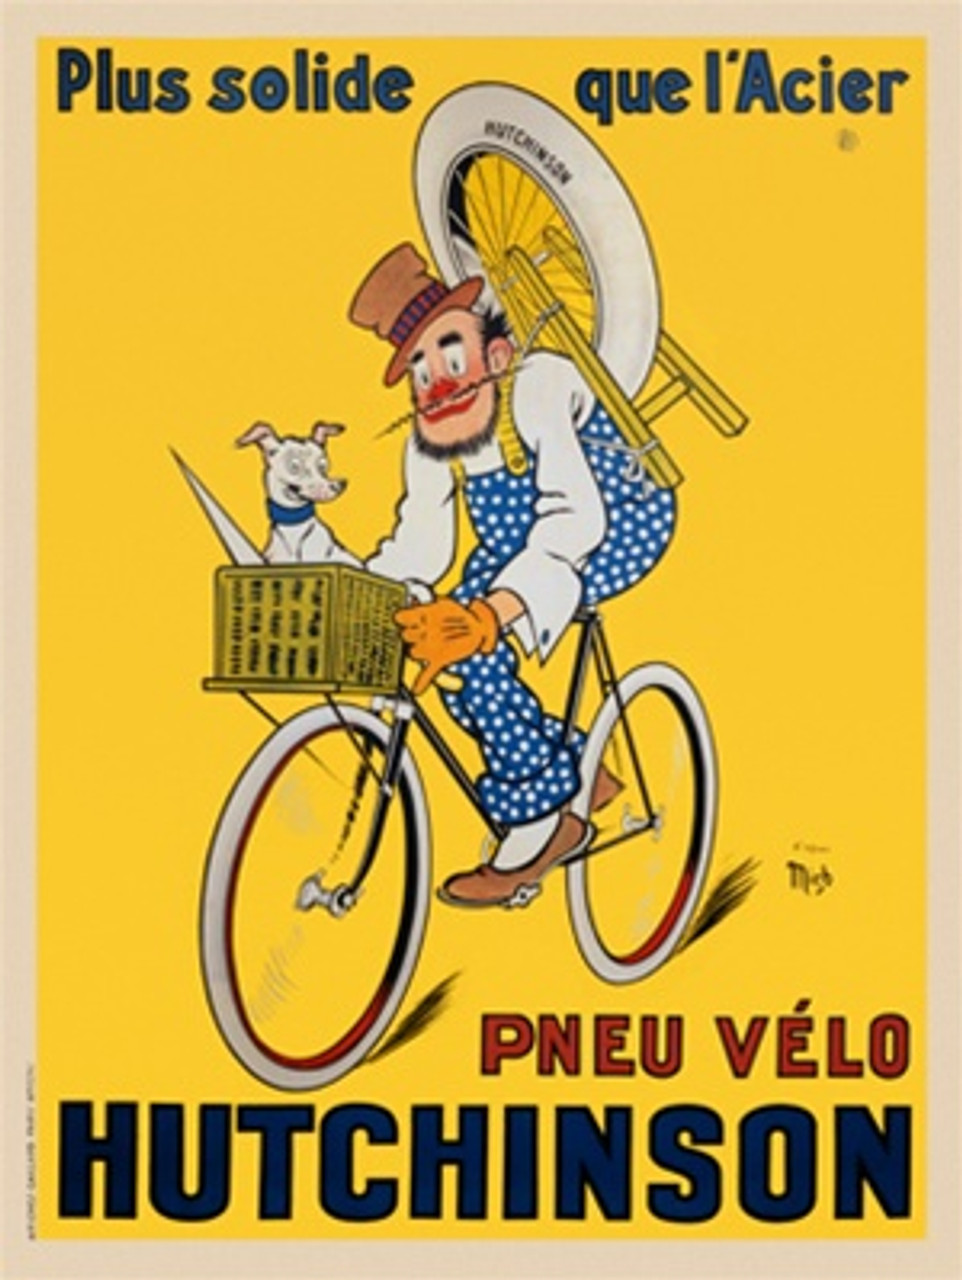 Pneu Velo Hutchinson by Mich 1929 France - Vintage Poster Reproductions. This vertical French transportation poster features a clown riding a bicycle with a dog in the basket and a wheel on a stand on his back. Giclee Advertising Print. Classic Posters